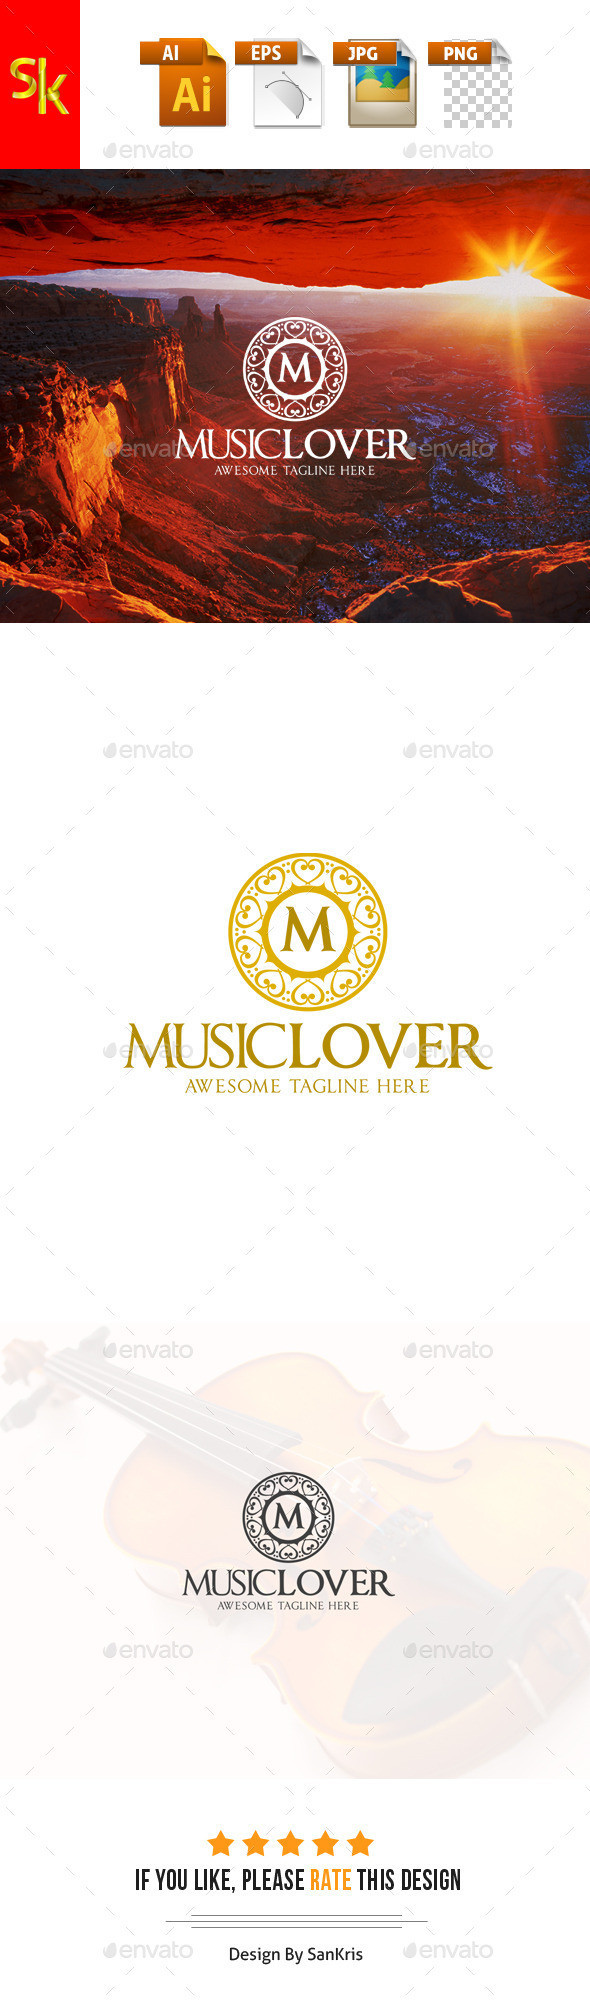 Music 20lover 20preview